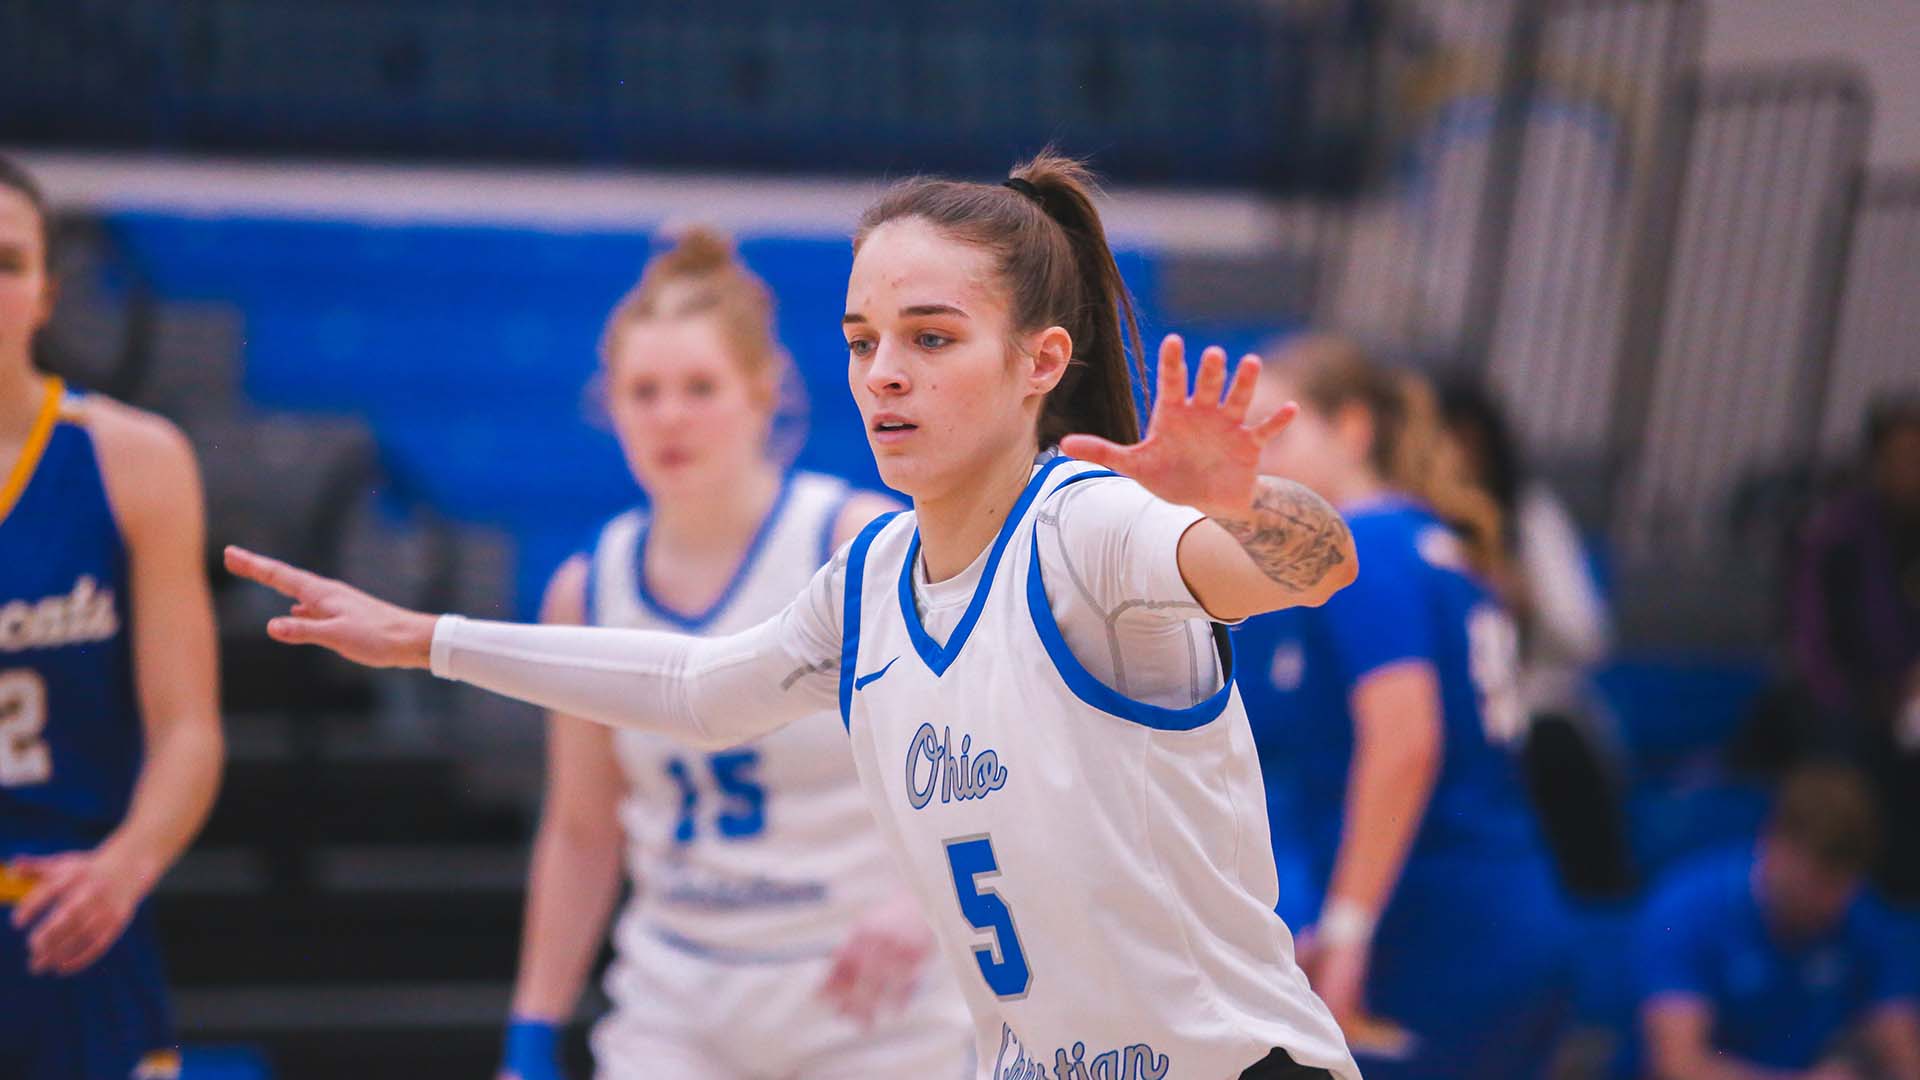 Cox garners another RSC Women's Basketball Player of the Wee award